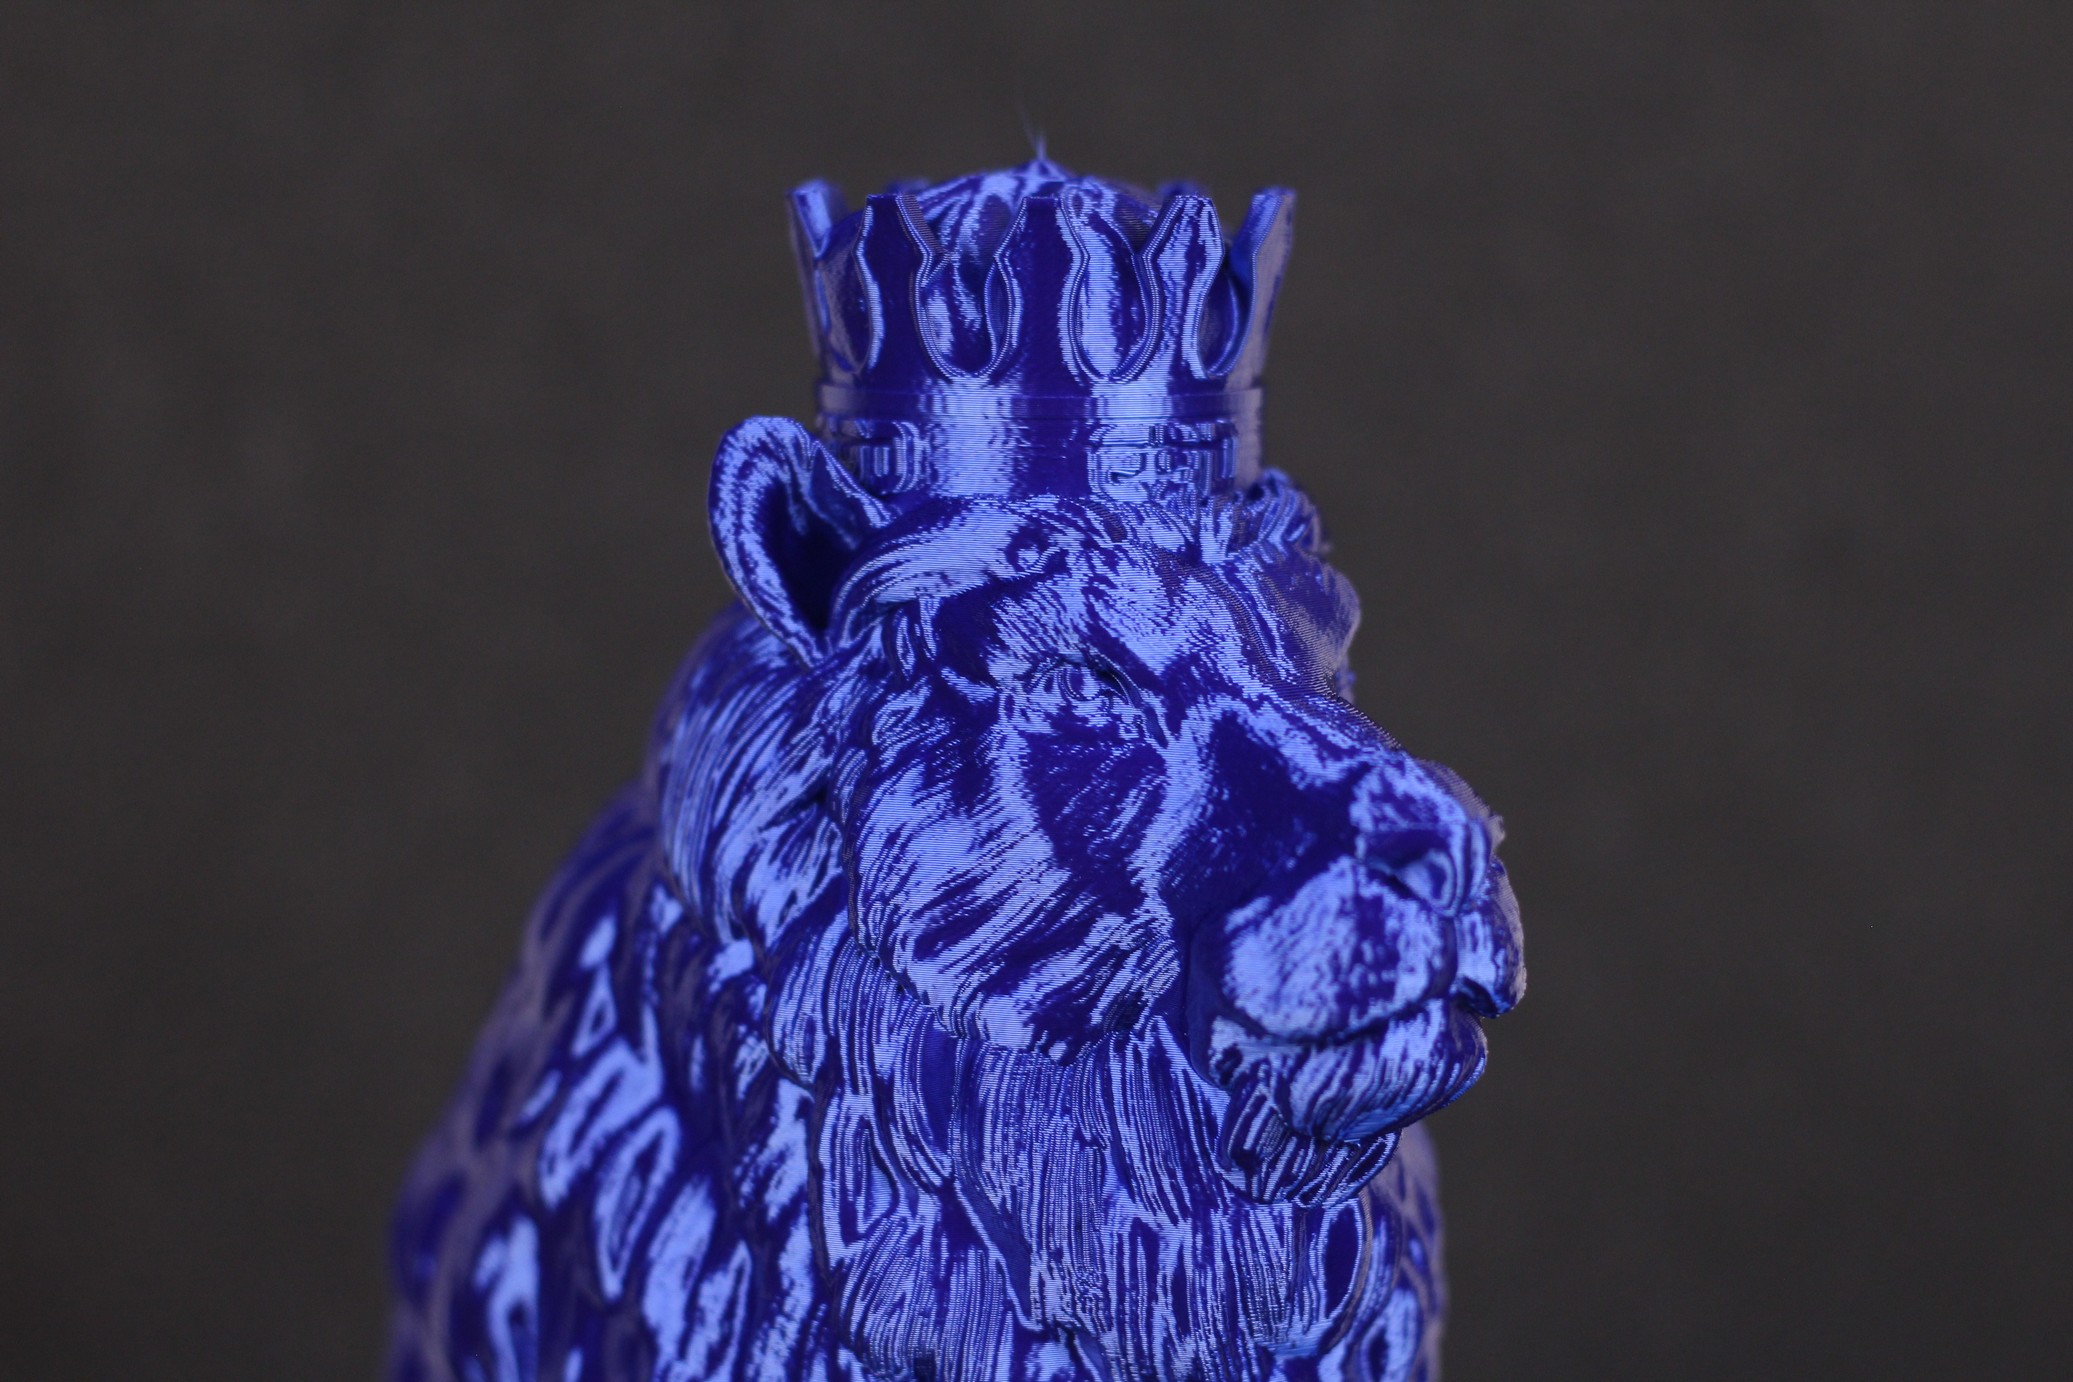 King Roary printed on Ender 3 S1 1 | Creality Ender 3 S1 Review: Almost Perfect